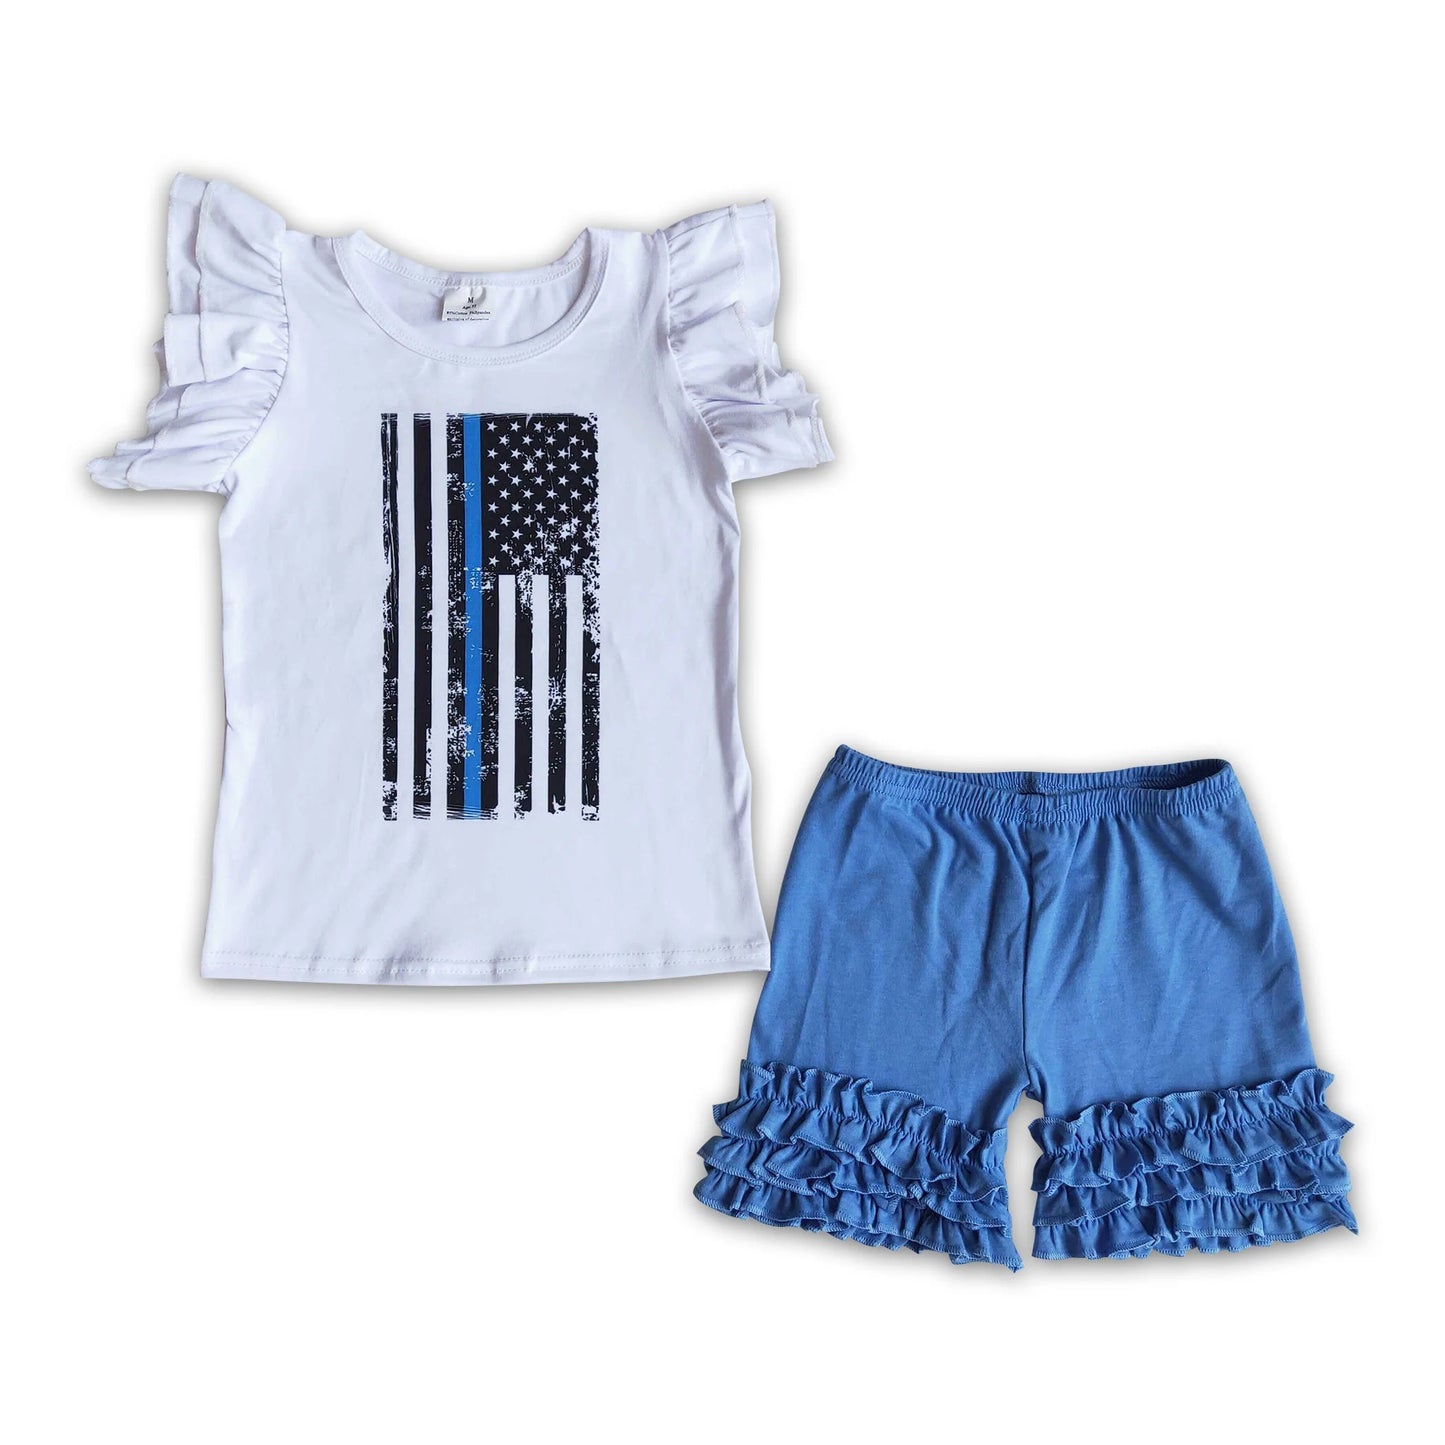 Ruffled Blue Line Outfit